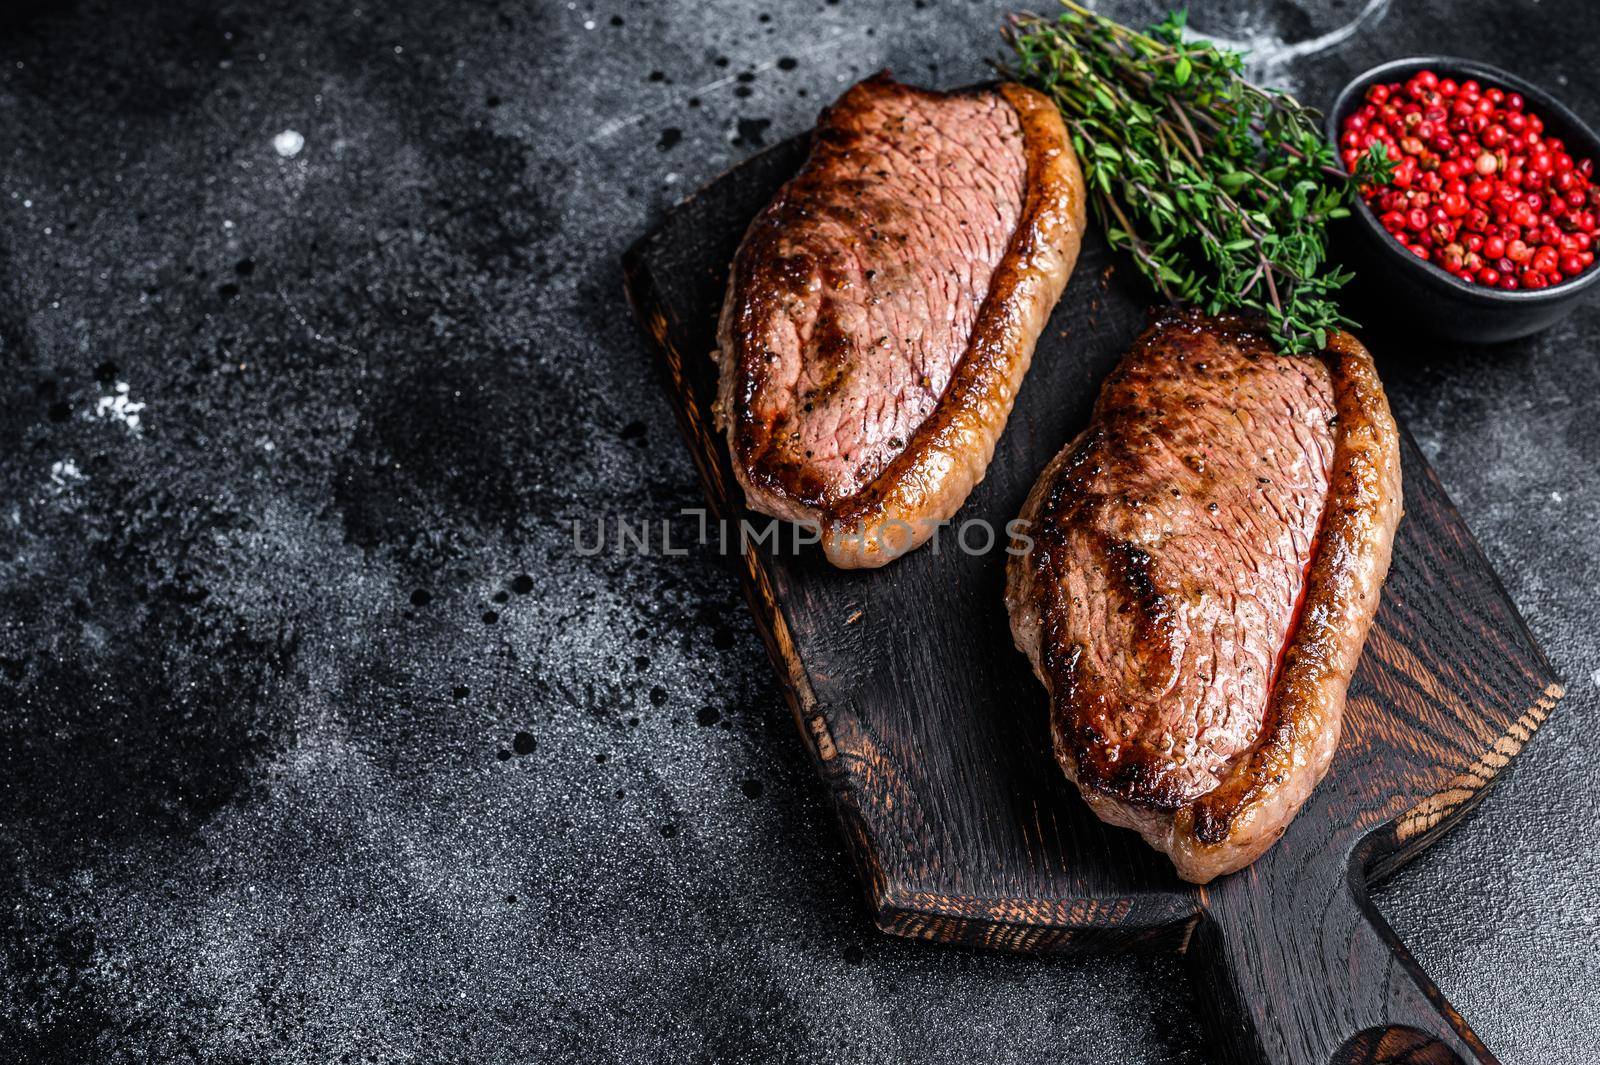 BBQ Grilled top sirloin cap or picanha steak on a wooden cutting board. Black background. Top view. Copy space by Composter